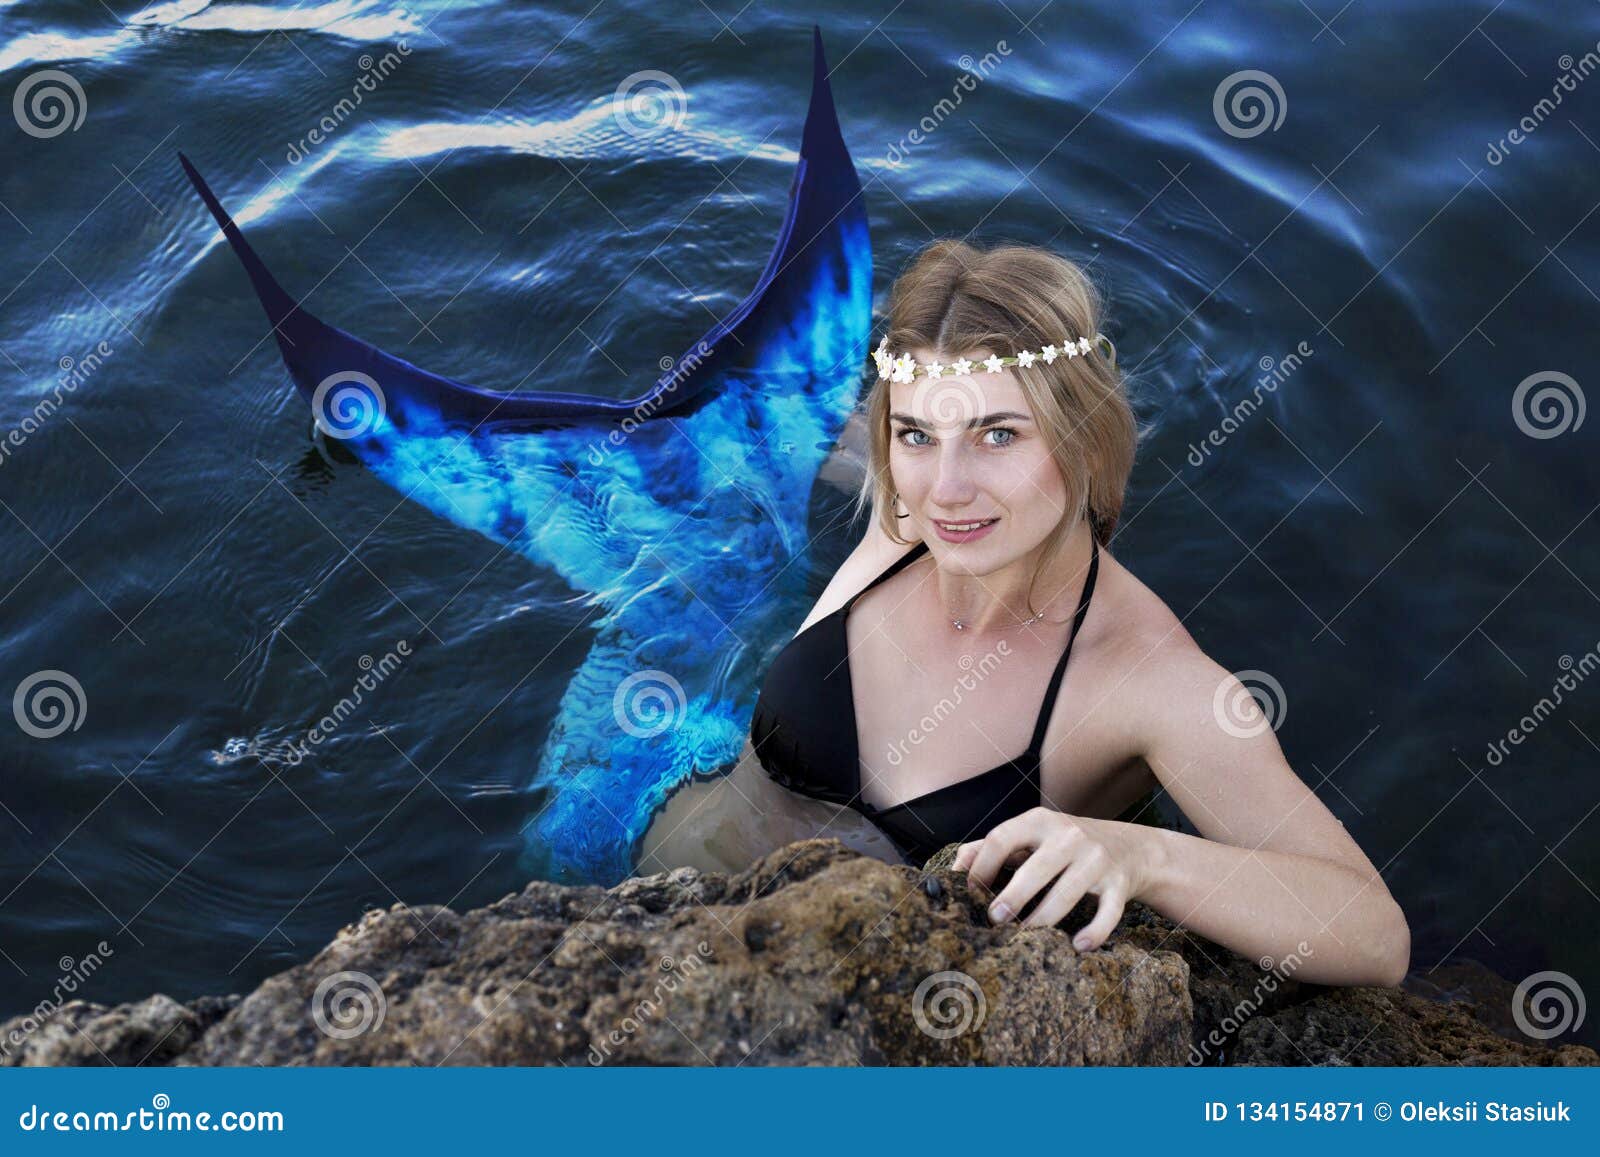 Mermaid Swims in the Water Peeking Out of the Rocks Stock Image ...